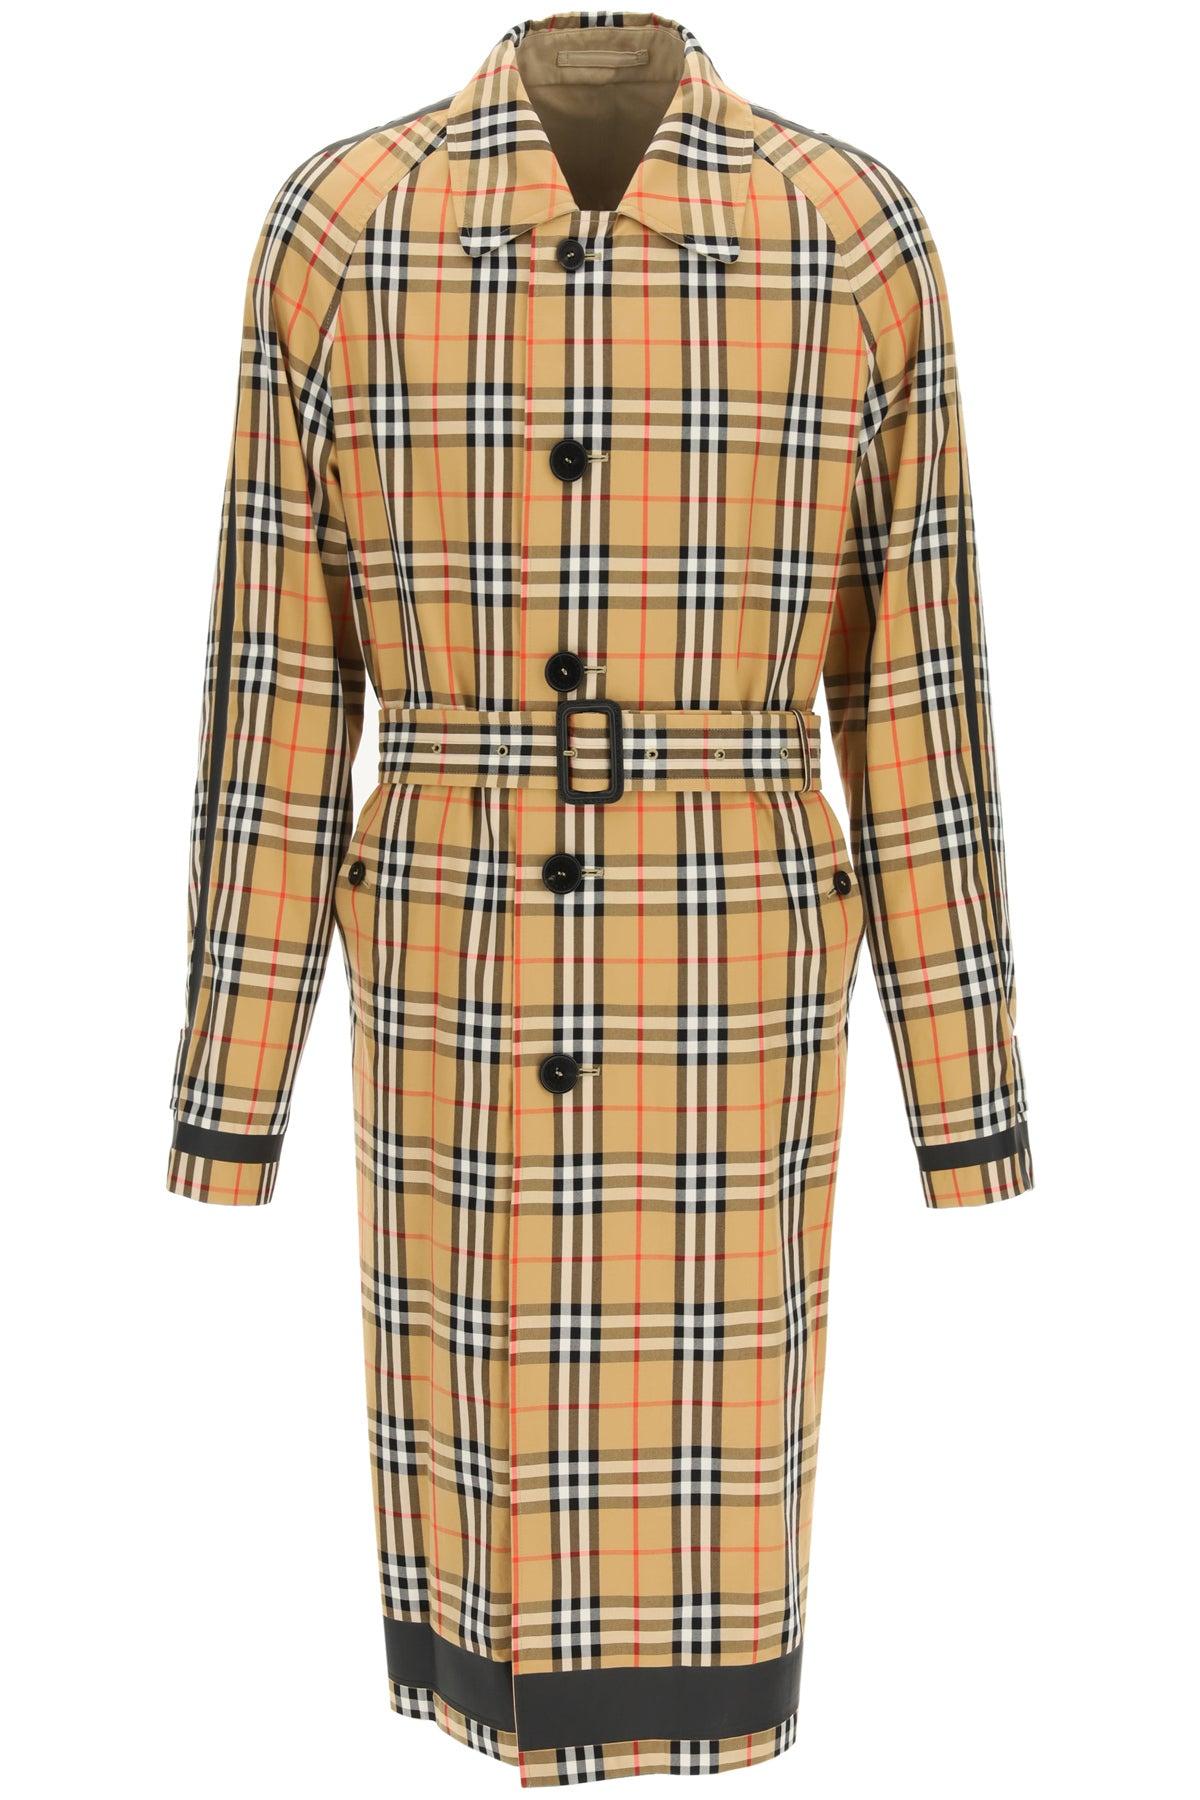 Burberry Reversible Trench Coat France, SAVE 43